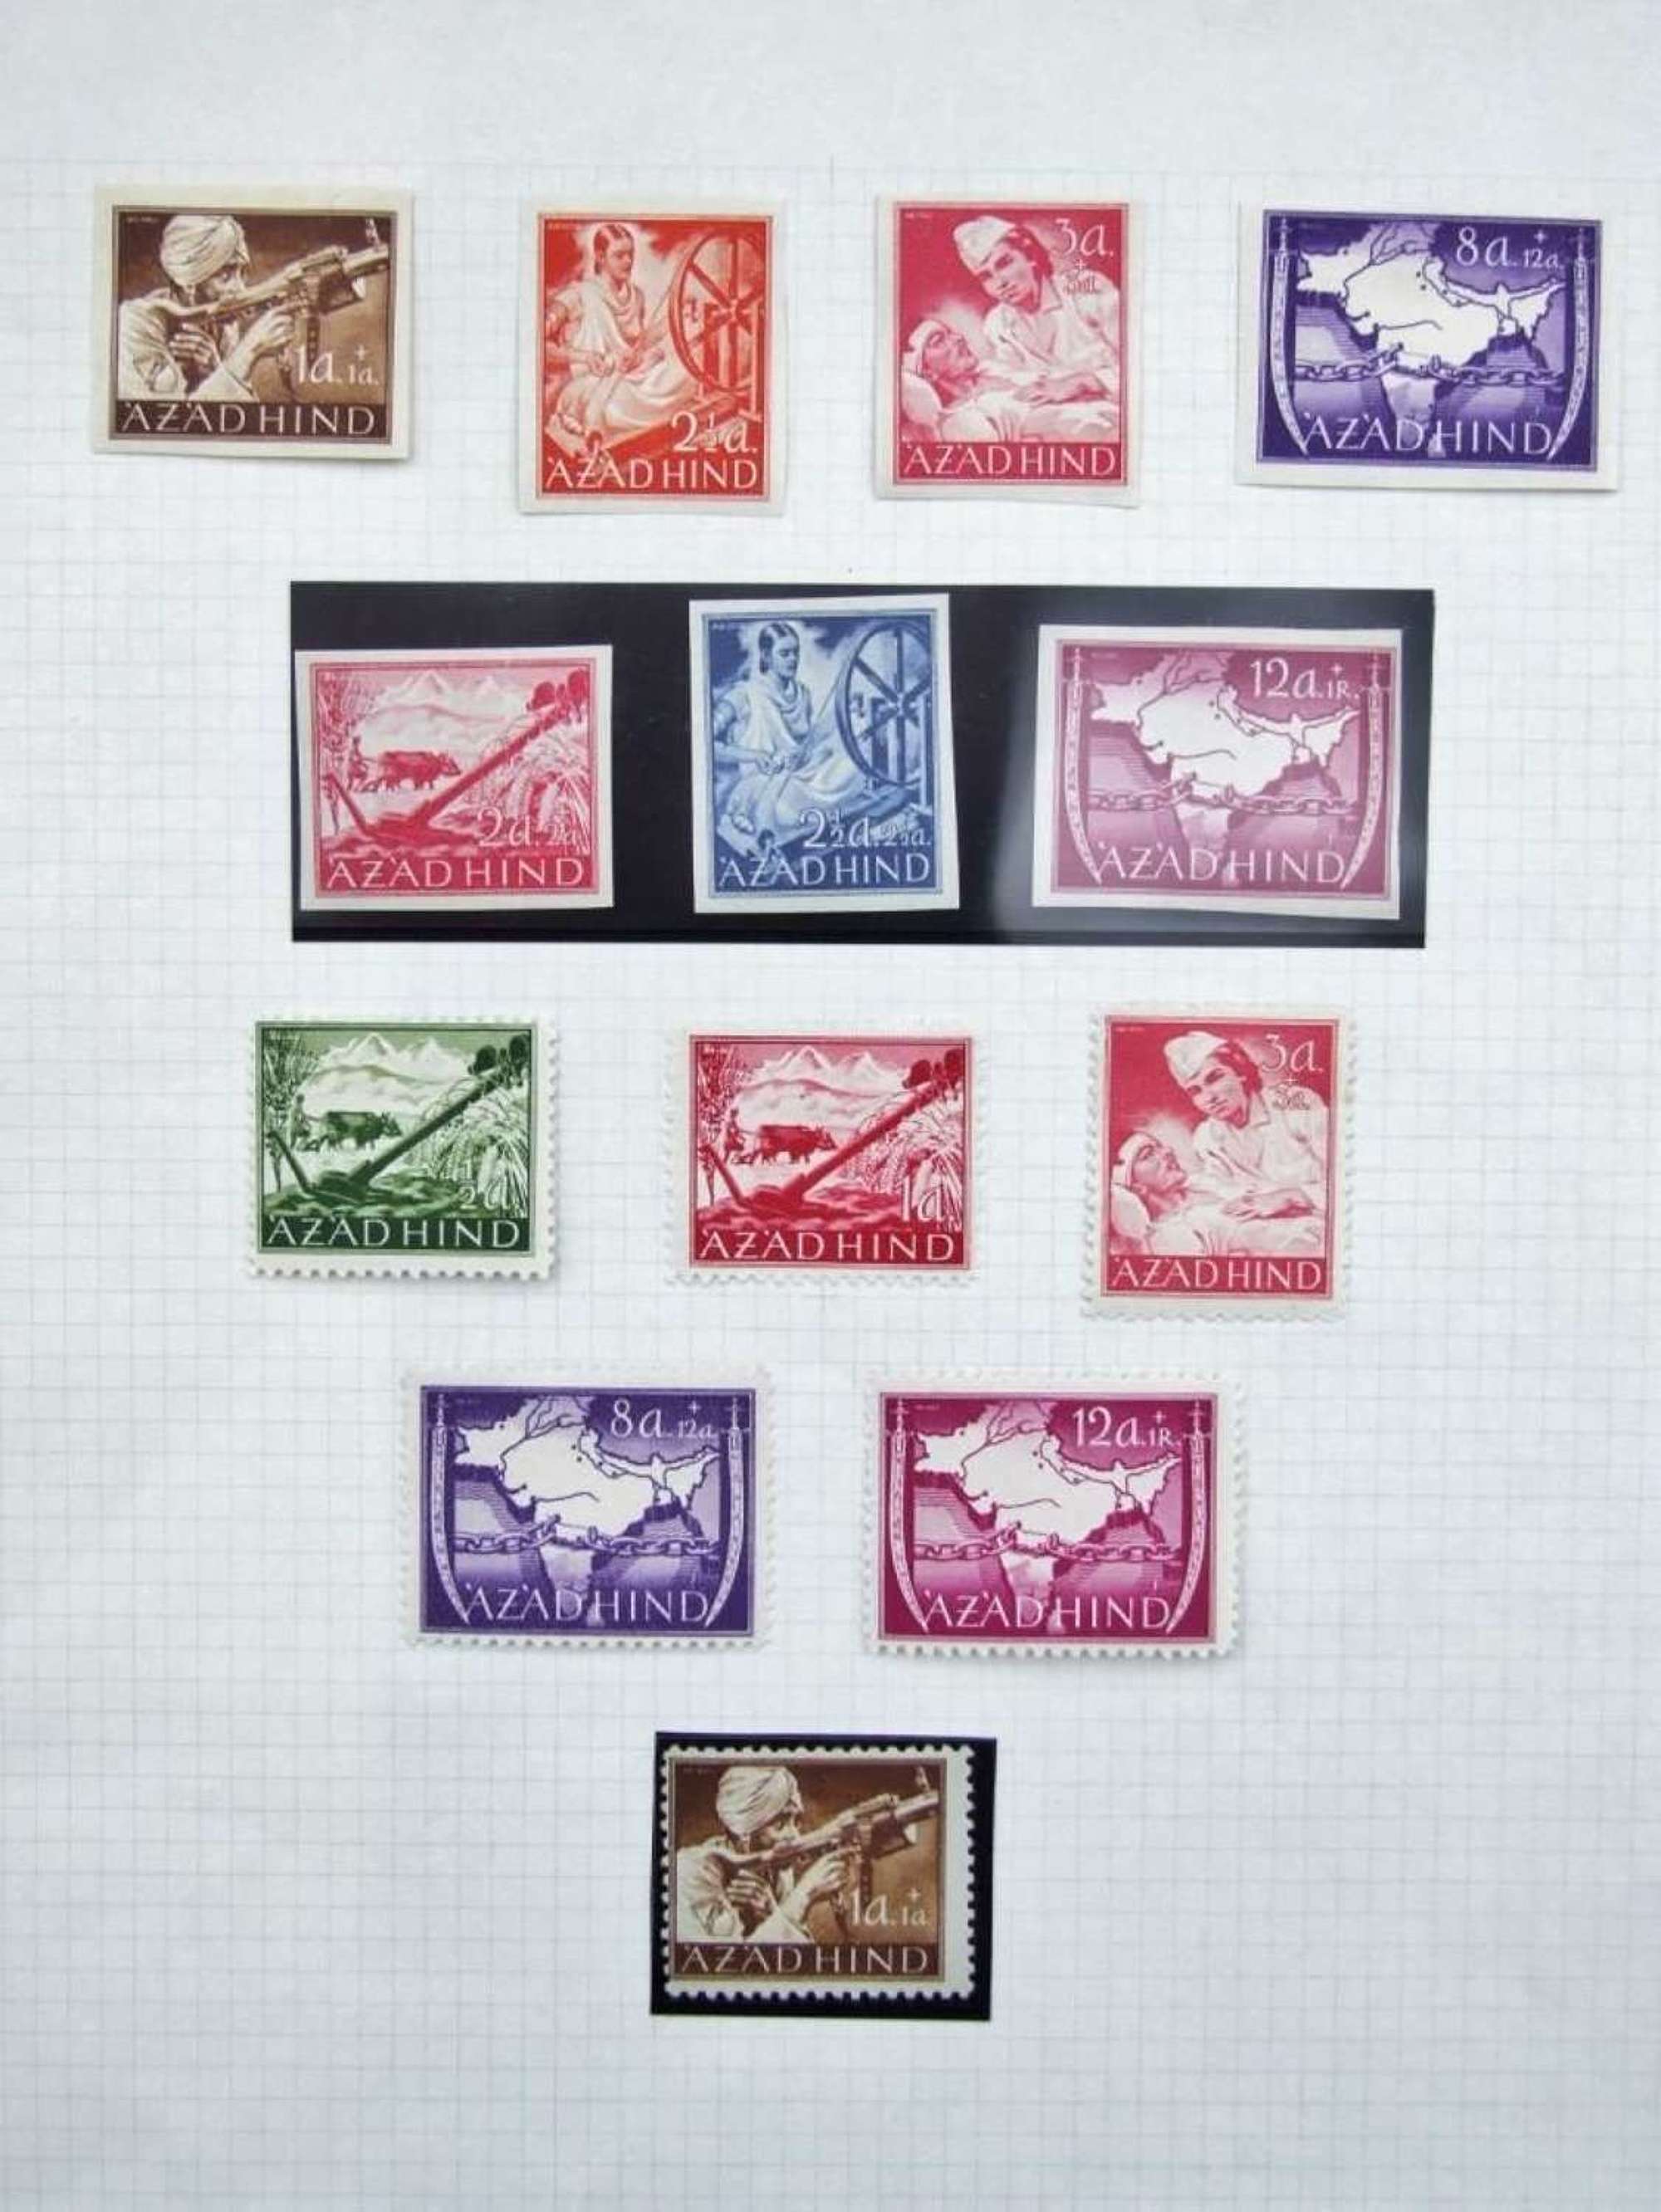 A collection of 13 Azad Hind stamps